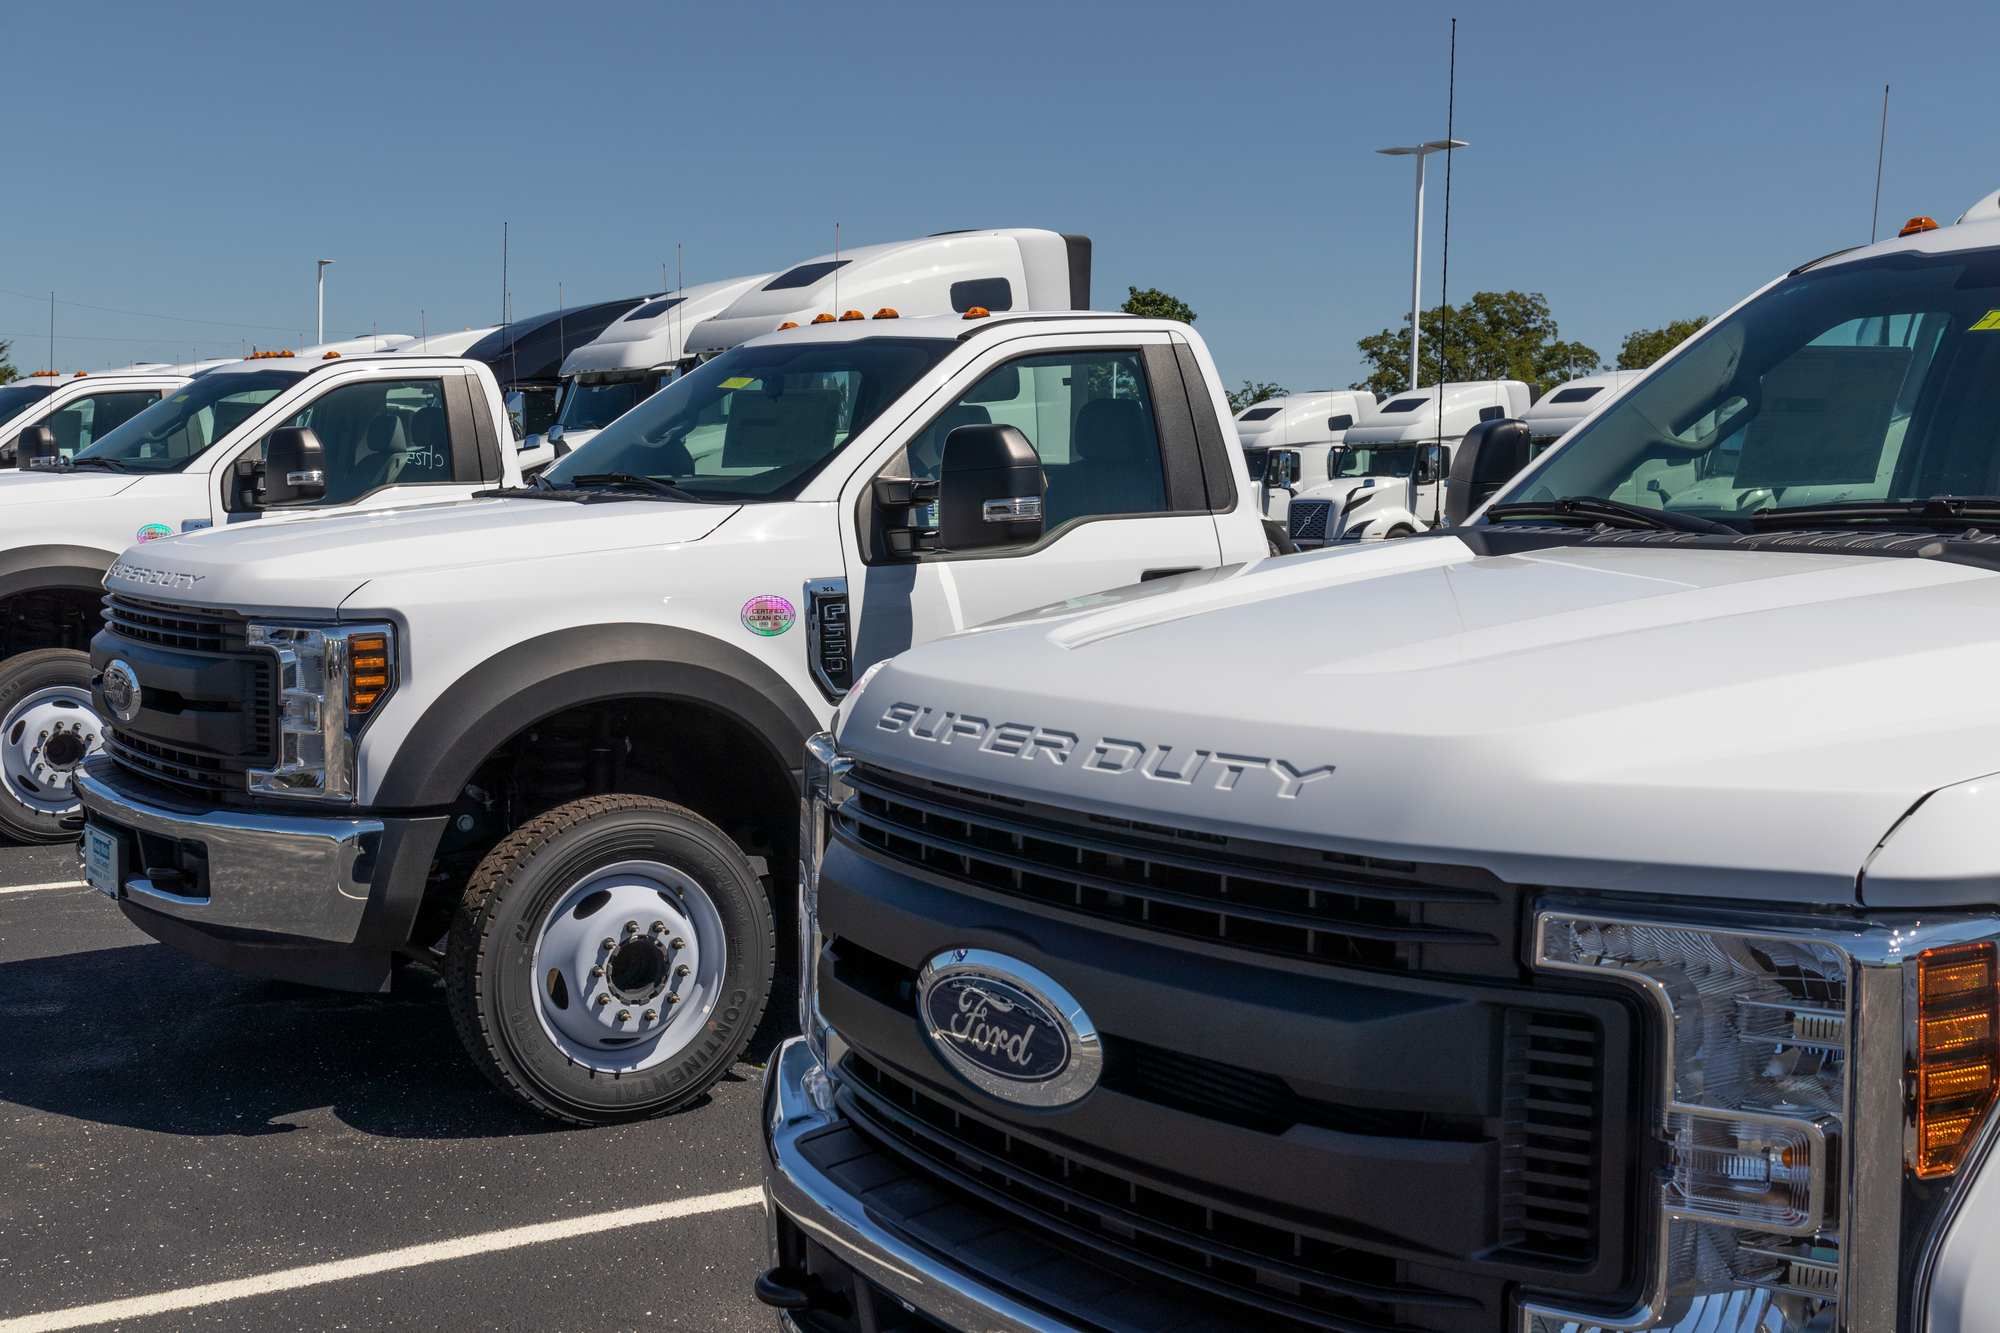 Ford Super Duty pickup trucks have a tailgate defect, a class action lawsuit claims.